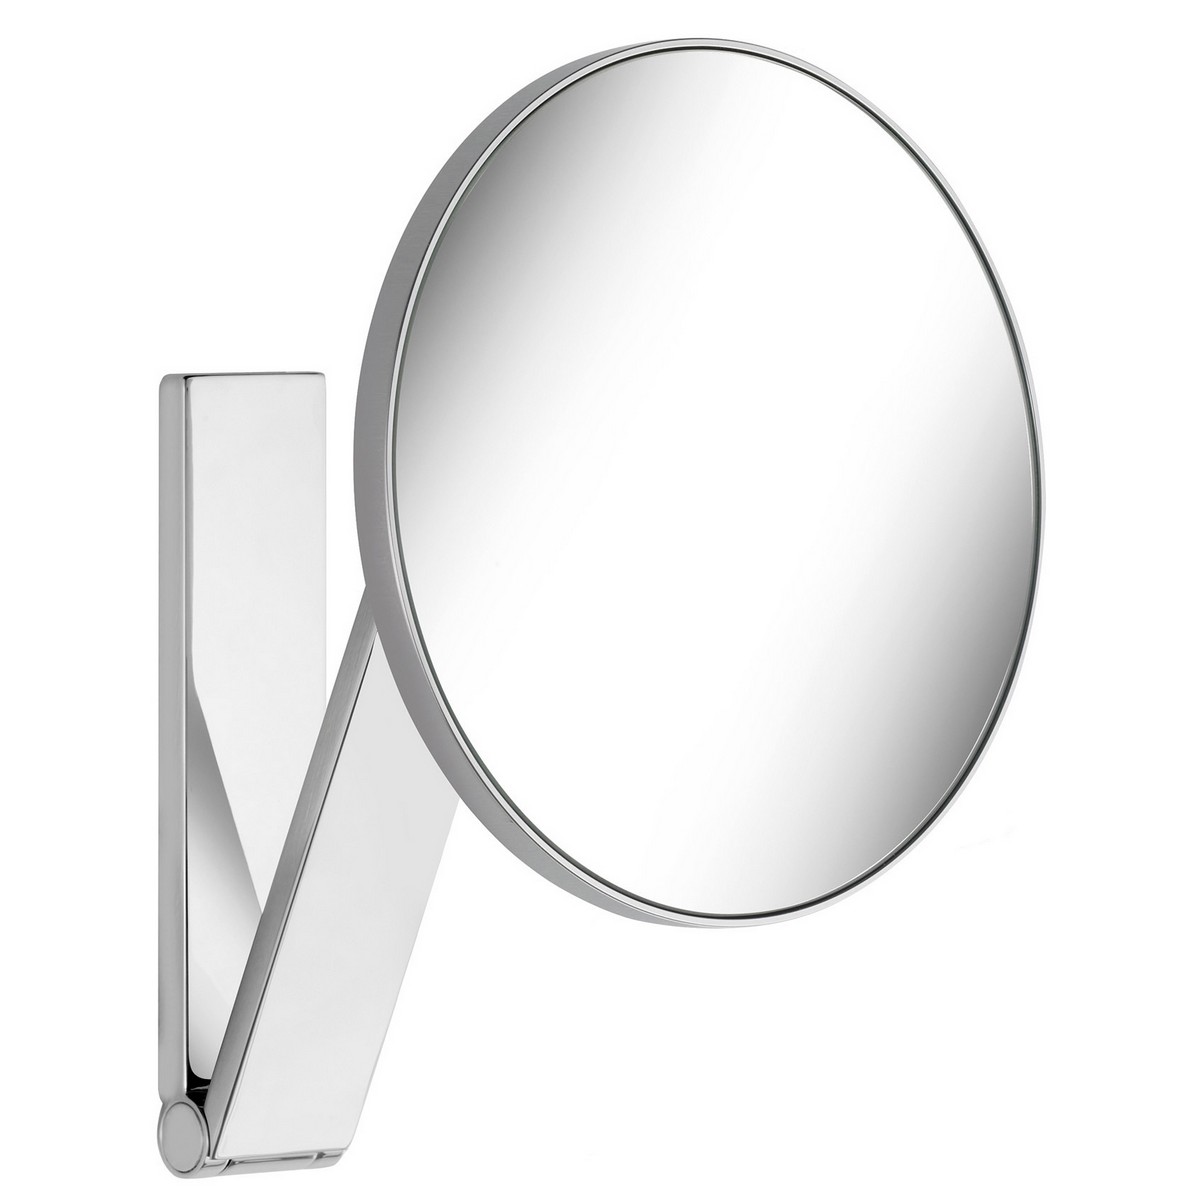 KEUCO 17610000 ILOOK MOVE 8 3/8 INCH WALL MOUNTED FRAMED ROUND LED BATHROOM MIRROR